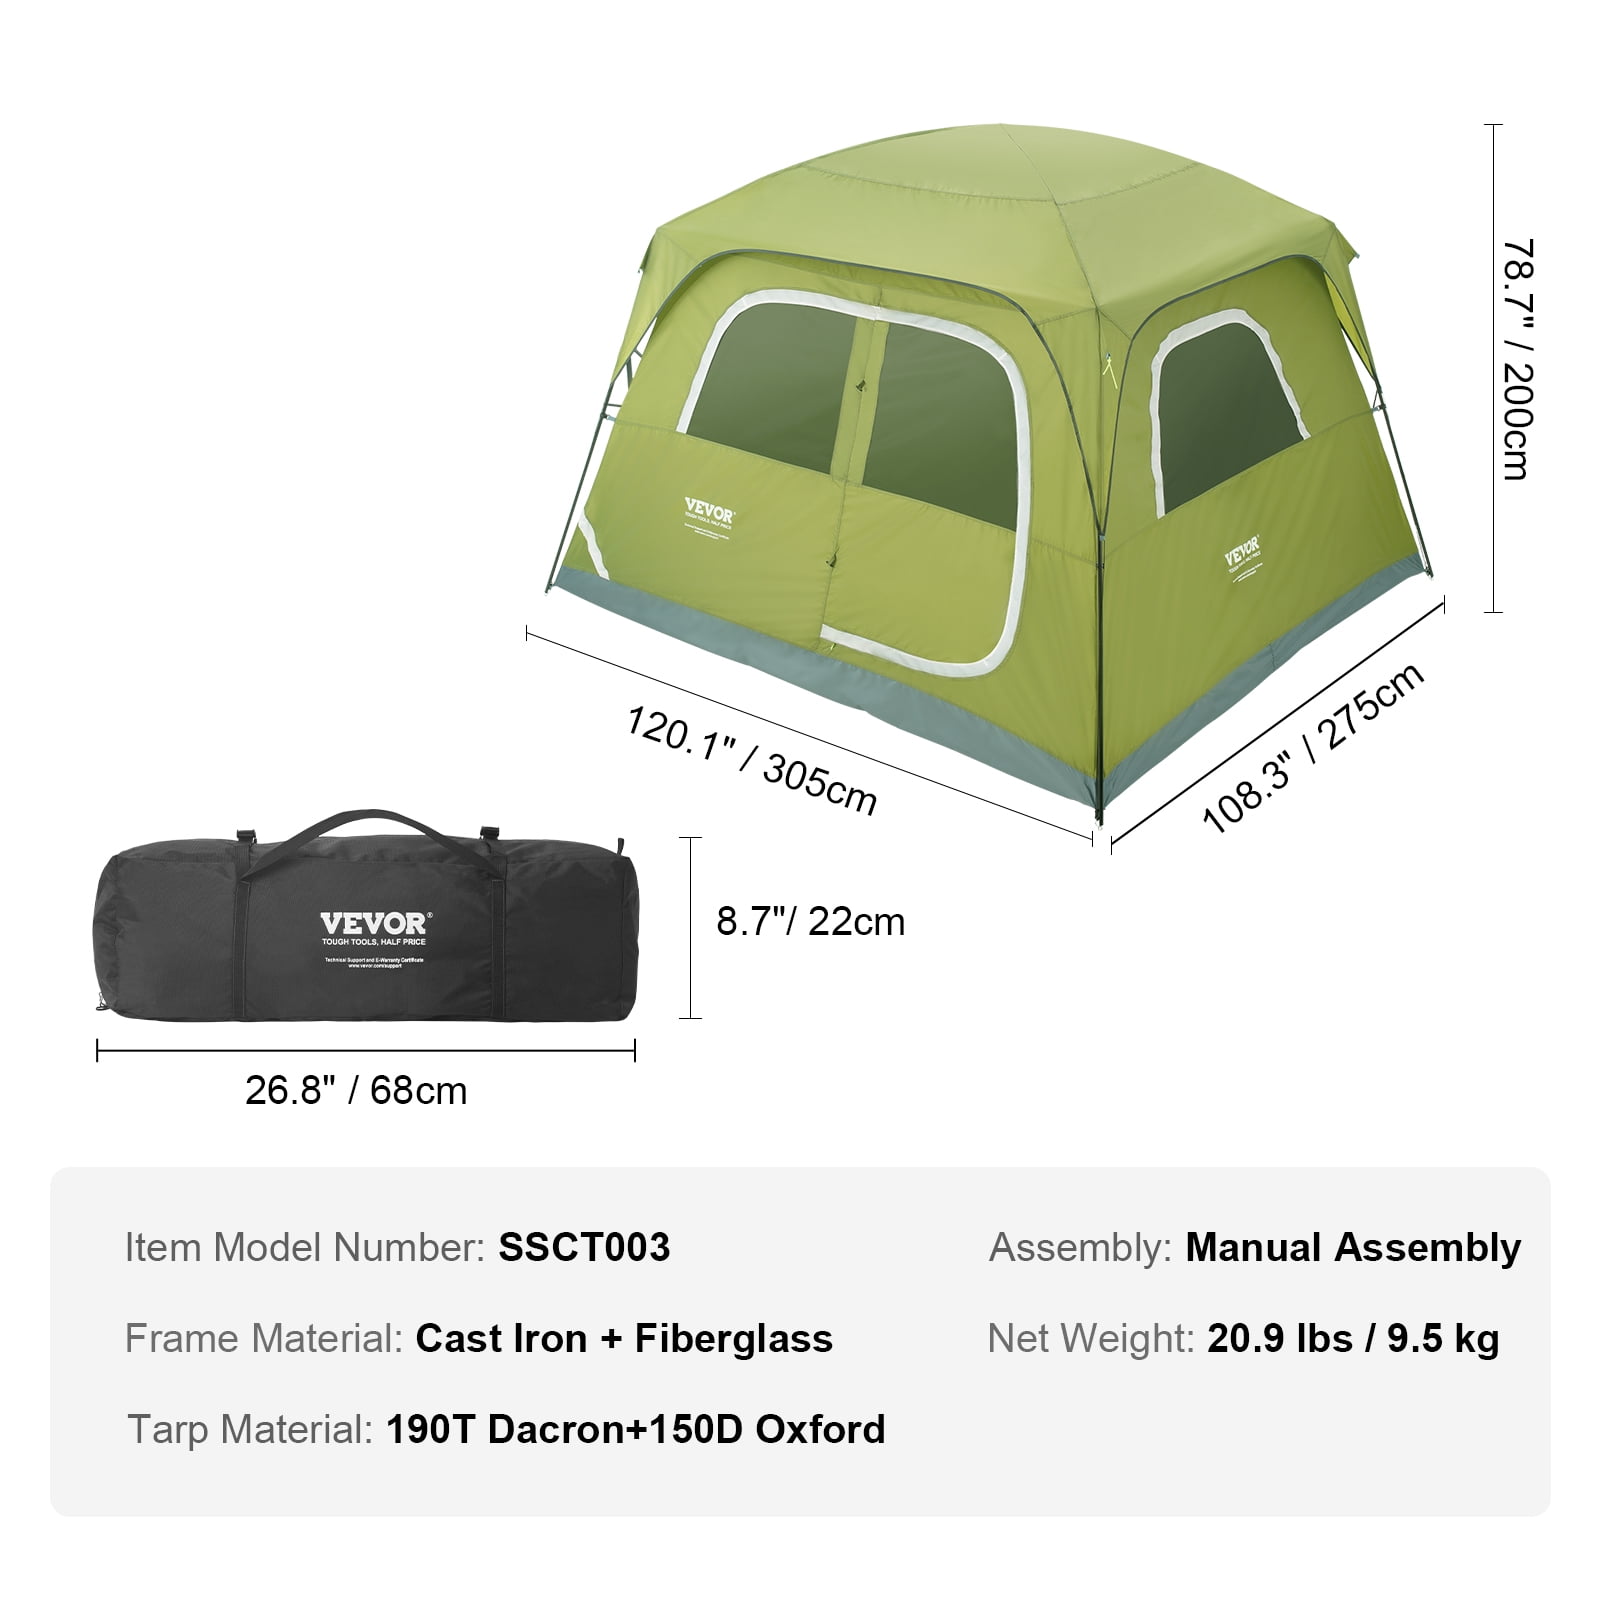 BENTISM Camping Tent Portable Dome Tent, 10 x 9 x 6.5 ft for 6